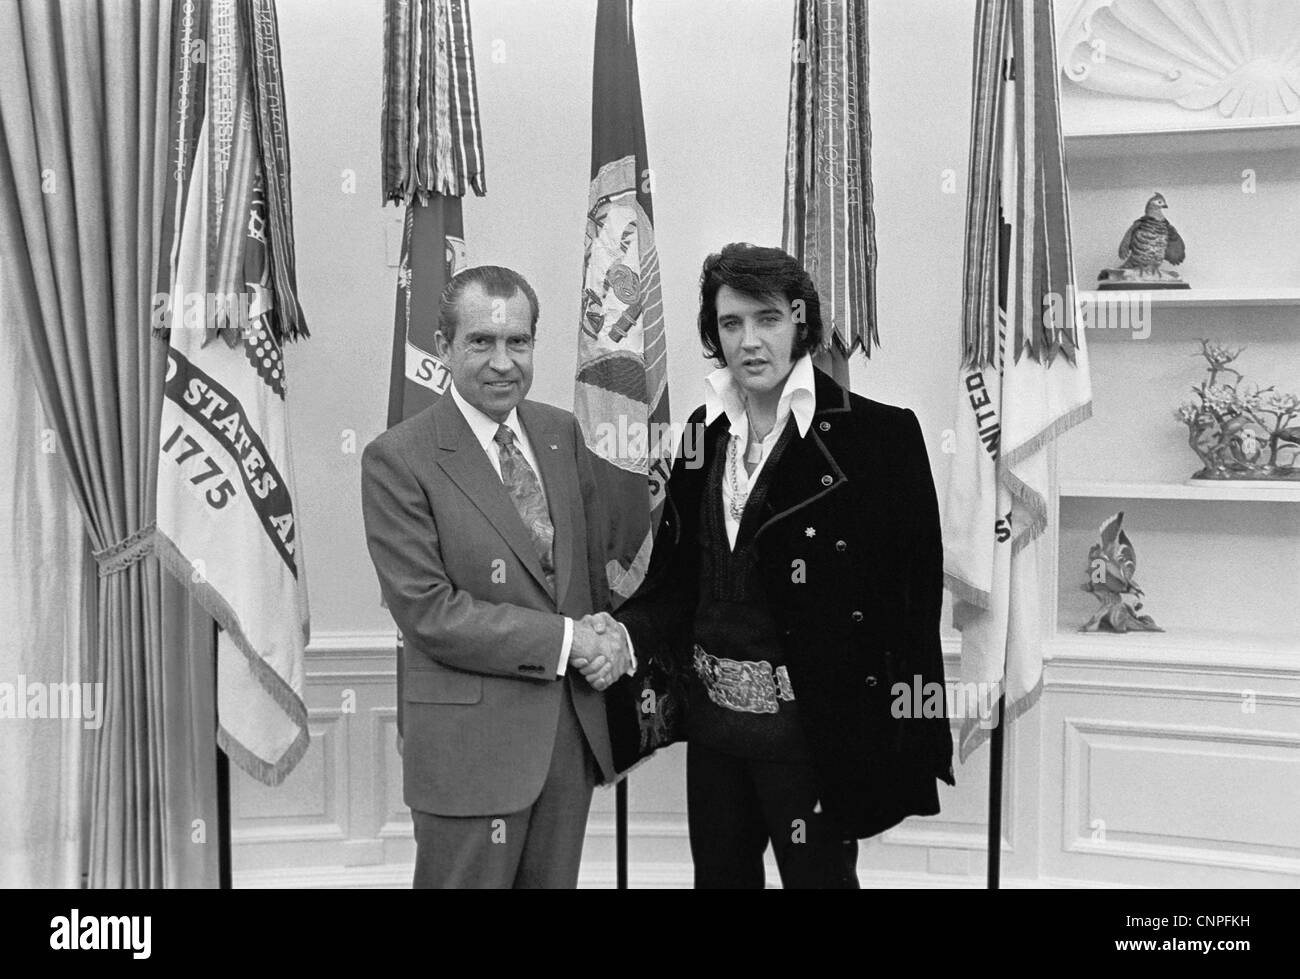 Elvis Presley poses for a photo with US President Richard M. Nixon in the Oval Office at the White House December 21, 1970 in Washington, DC. Stock Photo